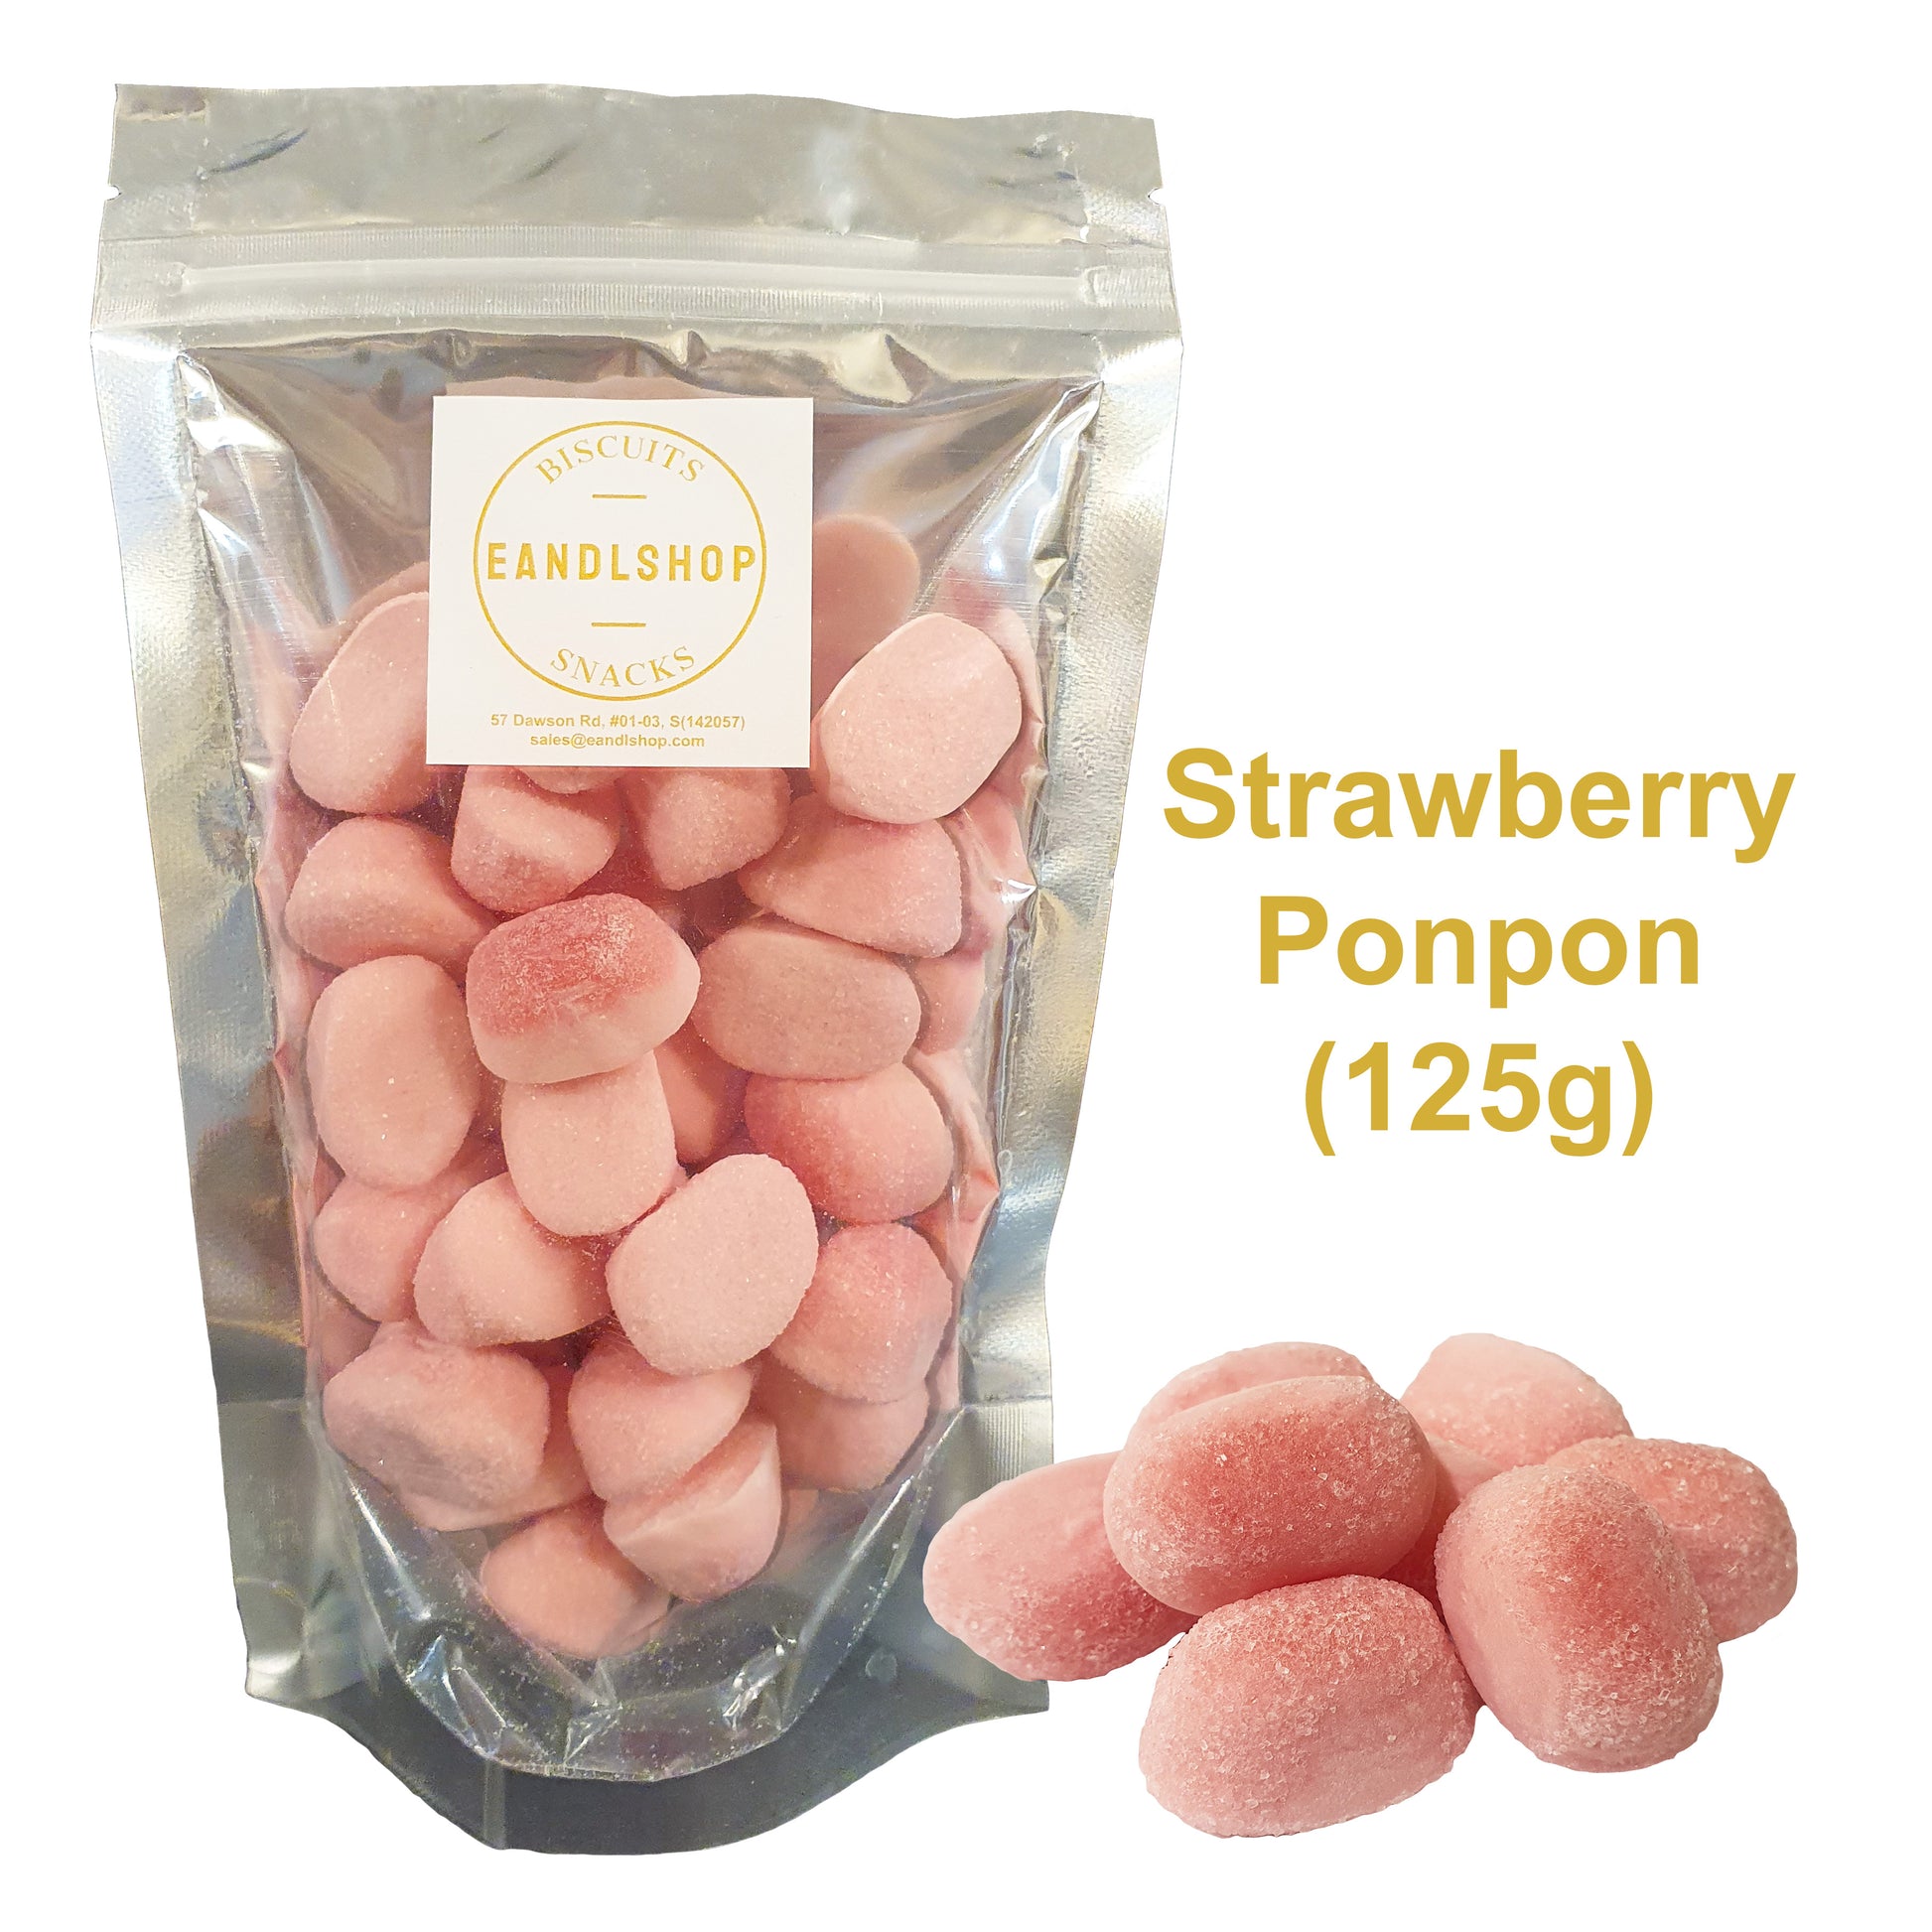 Haribo strawberry pon pon. Old-school biscuits, modern snacks (chips, crackers), cakes, gummies, plums, dried fruits, nuts, herbal tea – available at www.EANDLSHOP.com